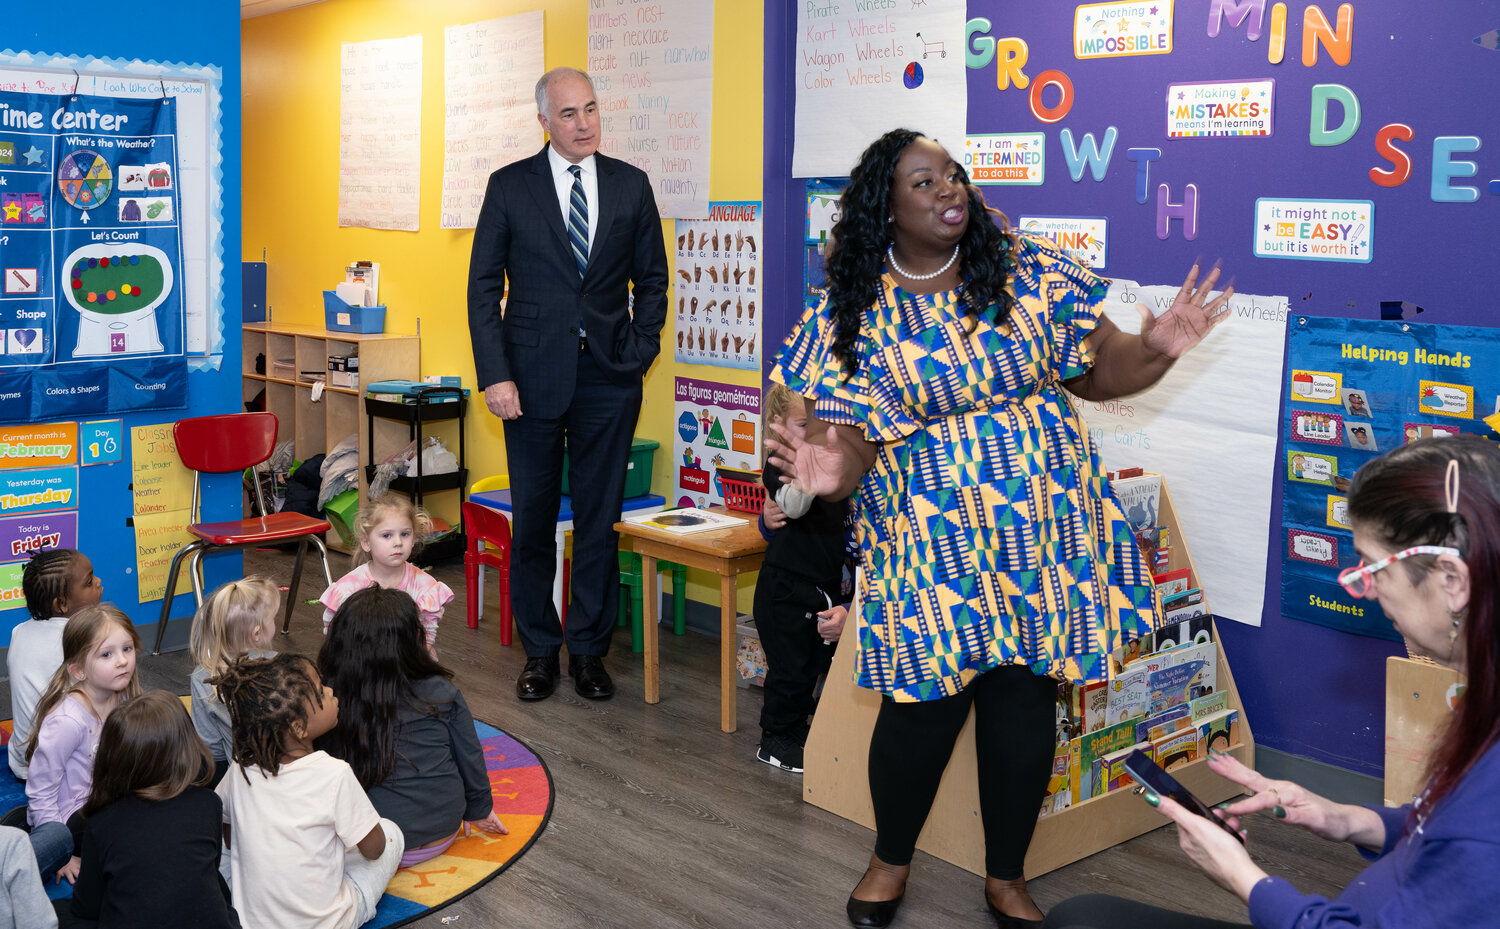 Valerie Hamilton, founder and executive director of Children of God Early Learning Center, addresses those who attended Sen. Bob Casey’s visit on Feb. 16.